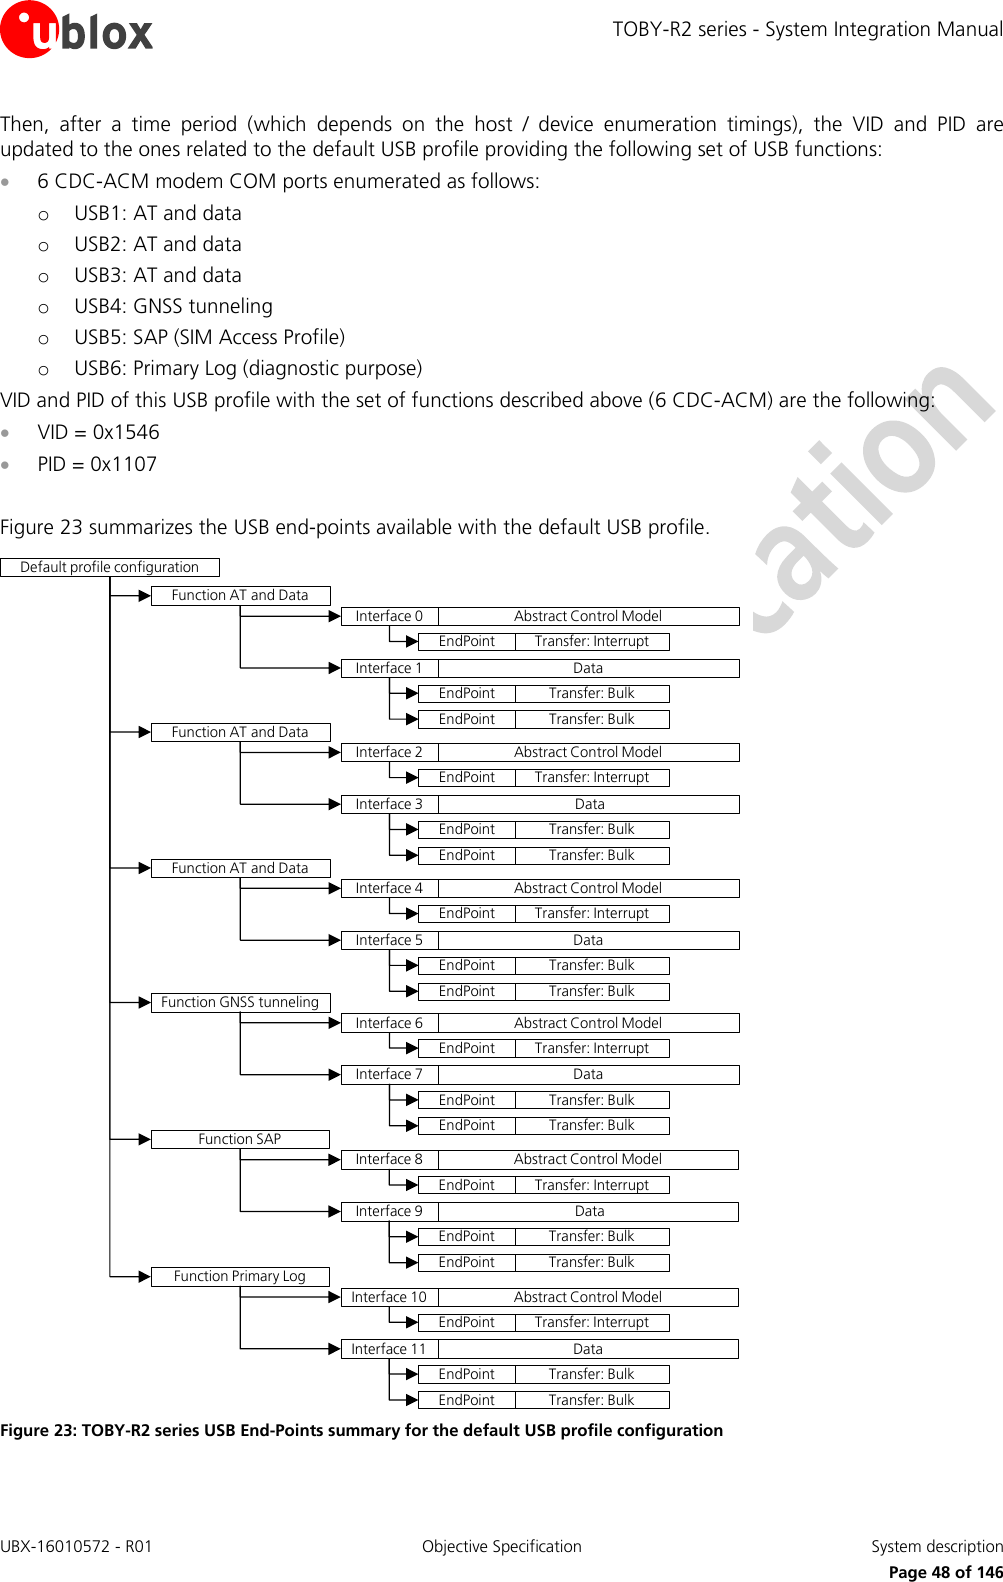 TOBY-R2 series - System Integration Manual UBX-16010572 - R01  Objective Specification  System description     Page 48 of 146 Then,  after  a  time  period  (which  depends  on  the  host  /  device  enumeration  timings),  the  VID  and  PID  are updated to the ones related to the default USB profile providing the following set of USB functions:  6 CDC-ACM modem COM ports enumerated as follows: o USB1: AT and data o USB2: AT and data o USB3: AT and data o USB4: GNSS tunneling  o USB5: SAP (SIM Access Profile) o USB6: Primary Log (diagnostic purpose) VID and PID of this USB profile with the set of functions described above (6 CDC-ACM) are the following:  VID = 0x1546  PID = 0x1107  Figure 23 summarizes the USB end-points available with the default USB profile.  Default profile configurationInterface 0 Abstract Control ModelEndPoint Transfer: InterruptInterface 1 DataEndPoint Transfer: BulkEndPoint Transfer: BulkFunction AT and DataInterface 2 Abstract Control ModelEndPoint Transfer: InterruptInterface 3 DataEndPoint Transfer: BulkEndPoint Transfer: BulkFunction AT and DataInterface 4 Abstract Control ModelEndPoint Transfer: InterruptInterface 5 DataEndPoint Transfer: BulkEndPoint Transfer: BulkFunction AT and DataInterface 6 Abstract Control ModelEndPoint Transfer: InterruptInterface 7 DataEndPoint Transfer: BulkEndPoint Transfer: BulkFunction GNSS tunnelingInterface 8 Abstract Control ModelEndPoint Transfer: InterruptInterface 9 DataEndPoint Transfer: BulkEndPoint Transfer: BulkFunction SAPInterface 10 Abstract Control ModelEndPoint Transfer: InterruptInterface 11 DataEndPoint Transfer: BulkEndPoint Transfer: BulkFunction Primary Log Figure 23: TOBY-R2 series USB End-Points summary for the default USB profile configuration  